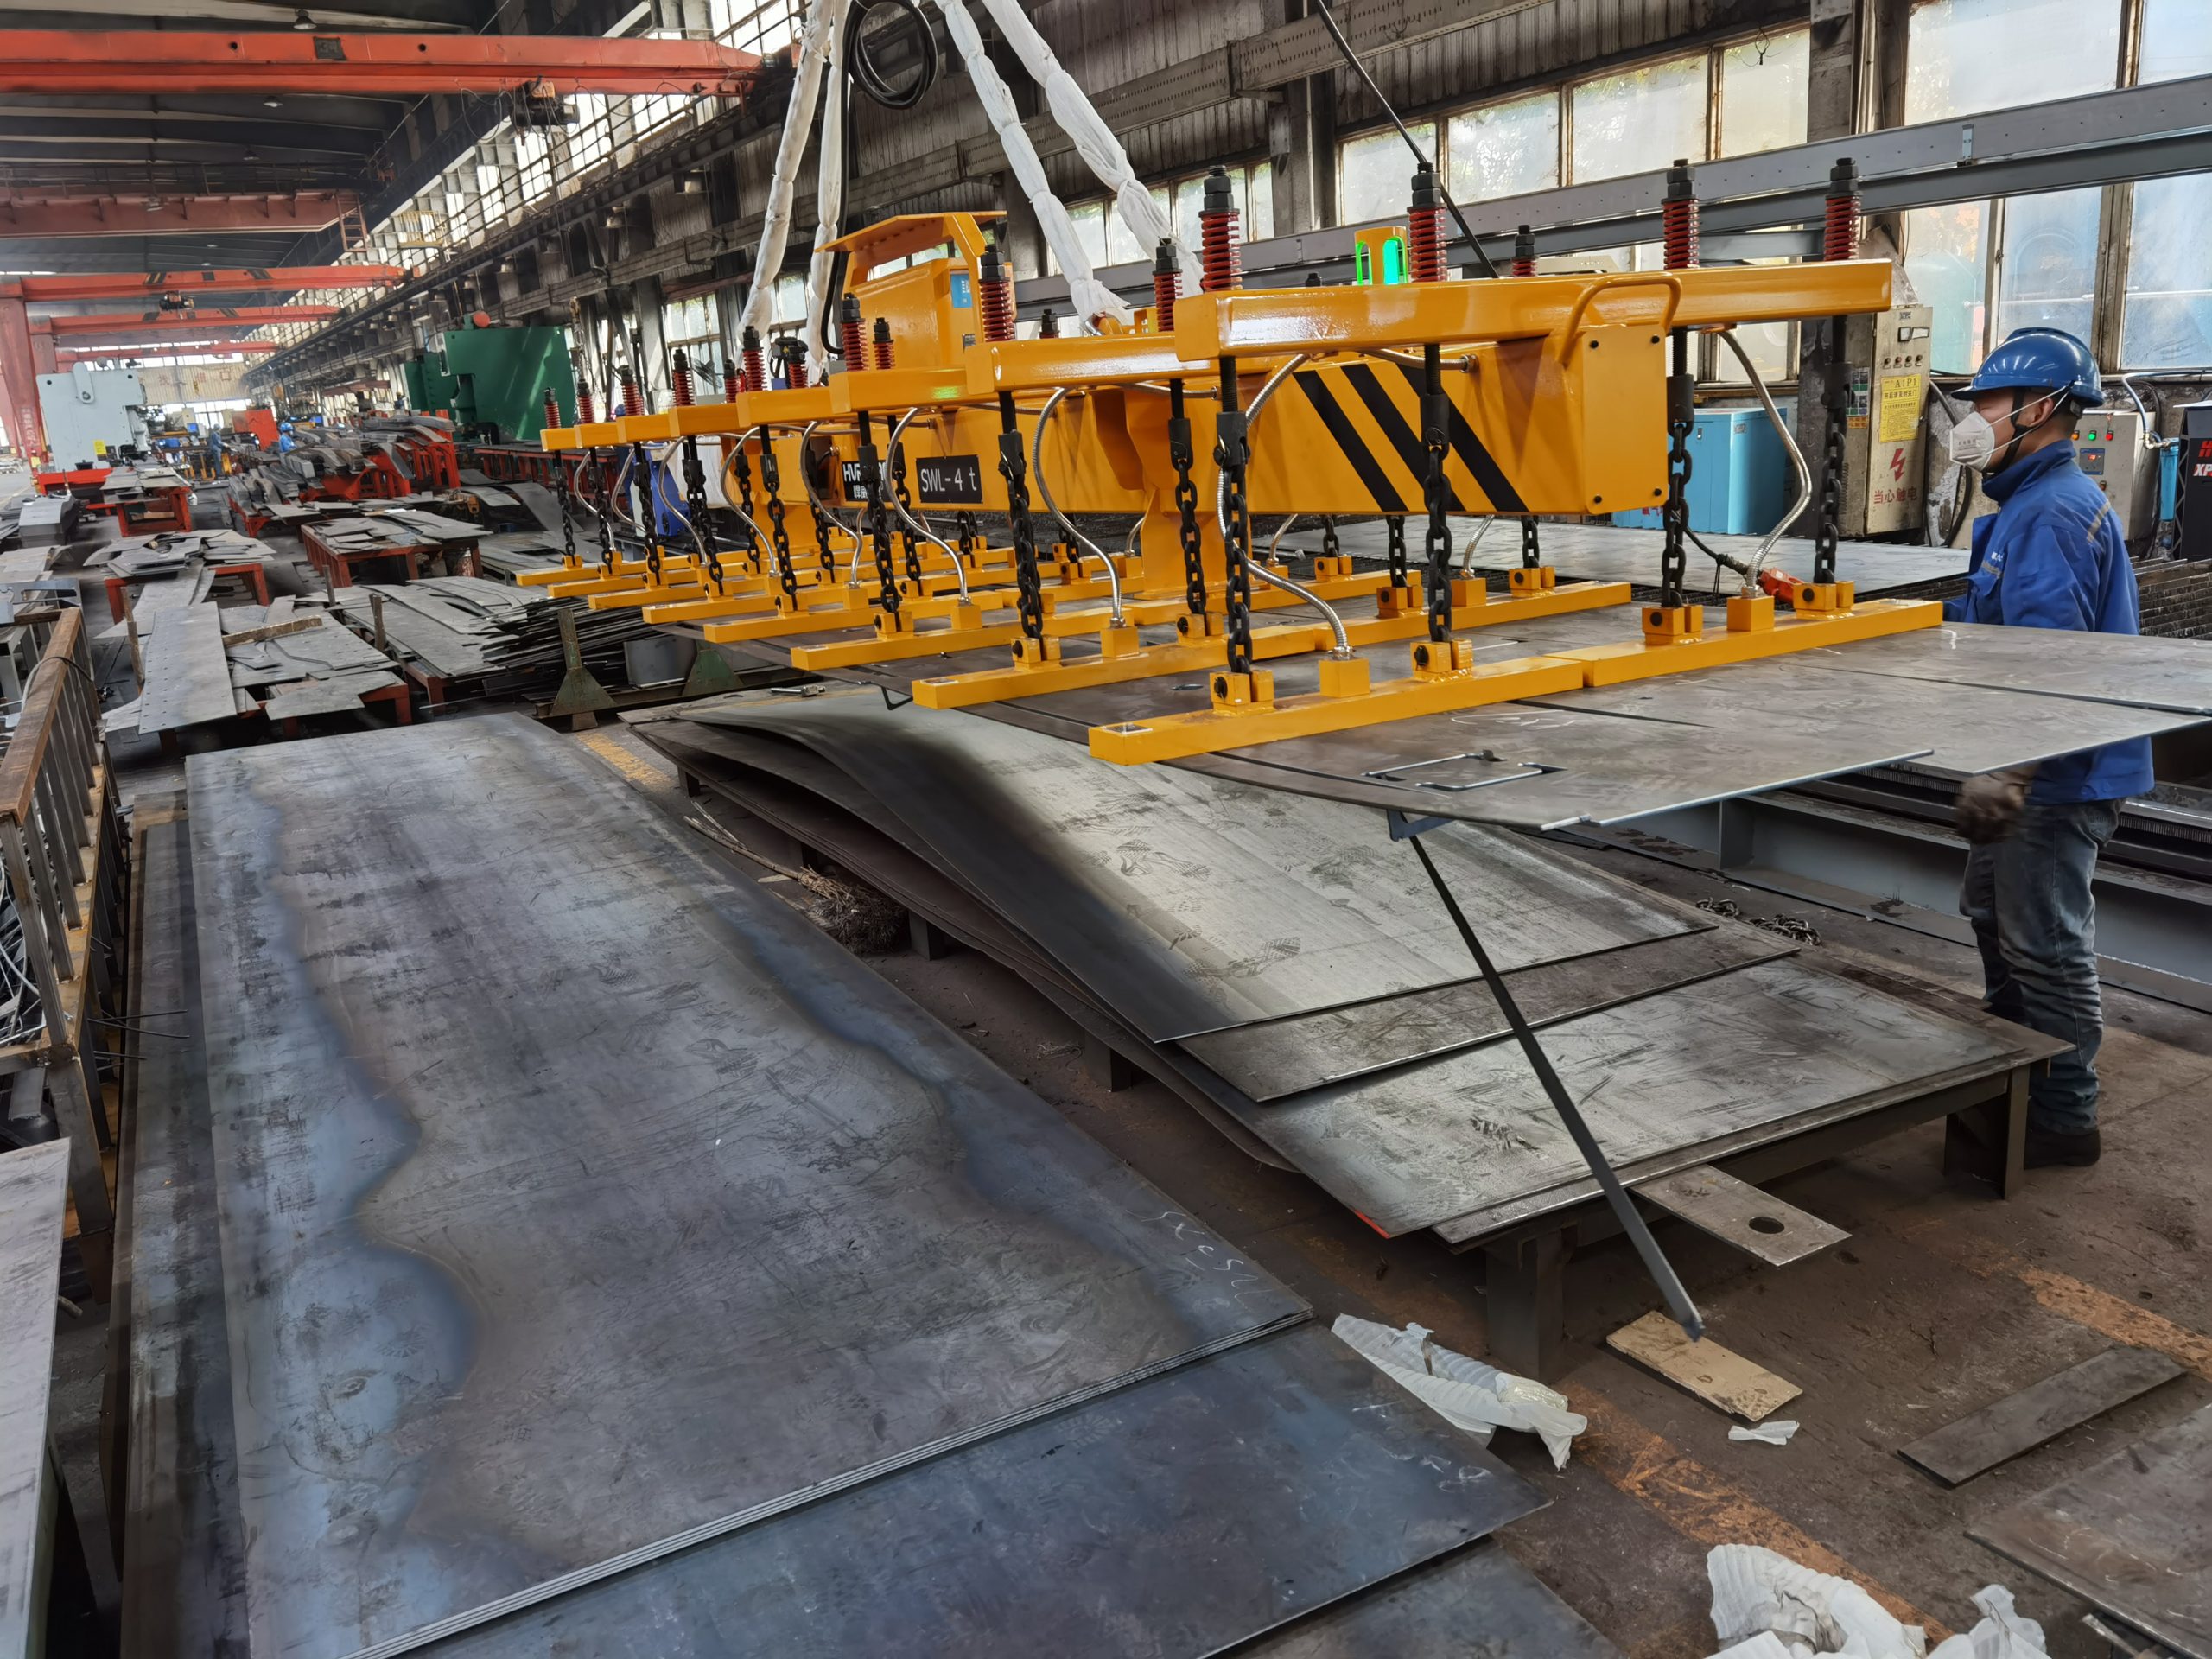 Lifting Magnet Safety Operation - Unloading Cut Steel Plate Parts | HVR MAG